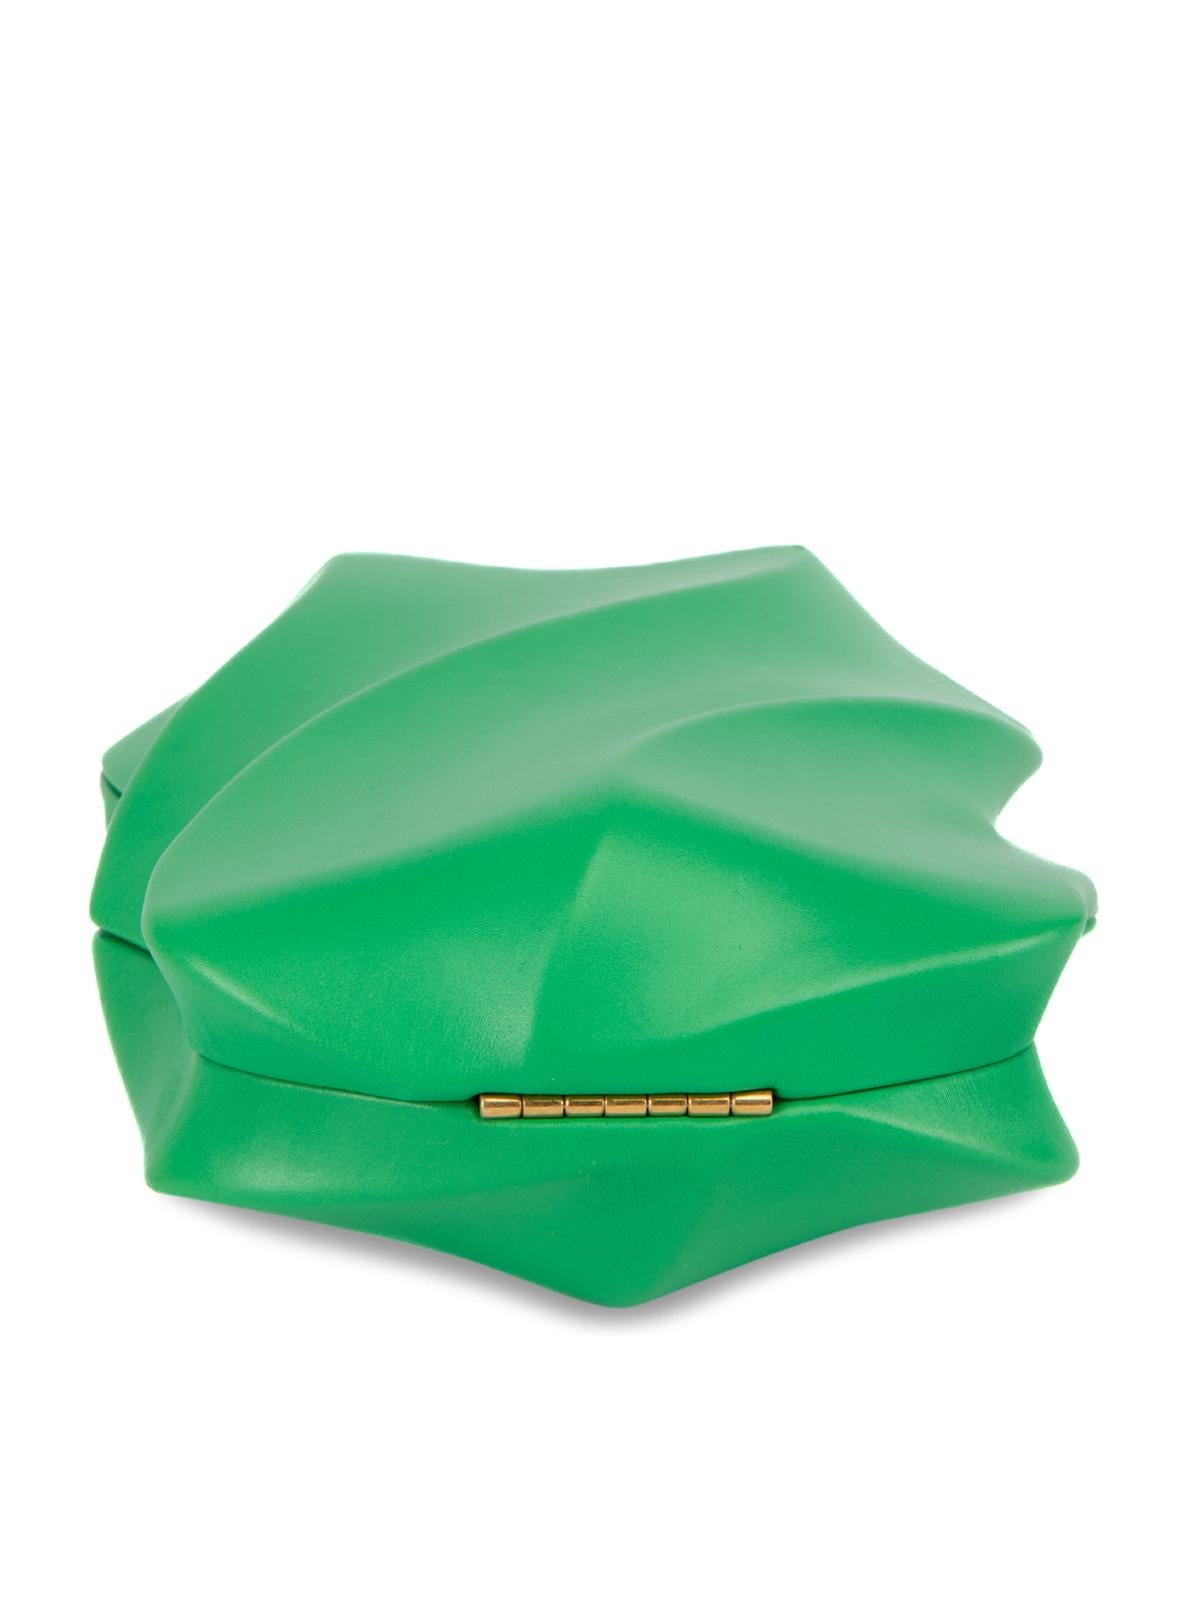 Pre-Loved Bottega Veneta Women's Green Whirl Spiral Clutch Bag In Excellent Condition In London, GB